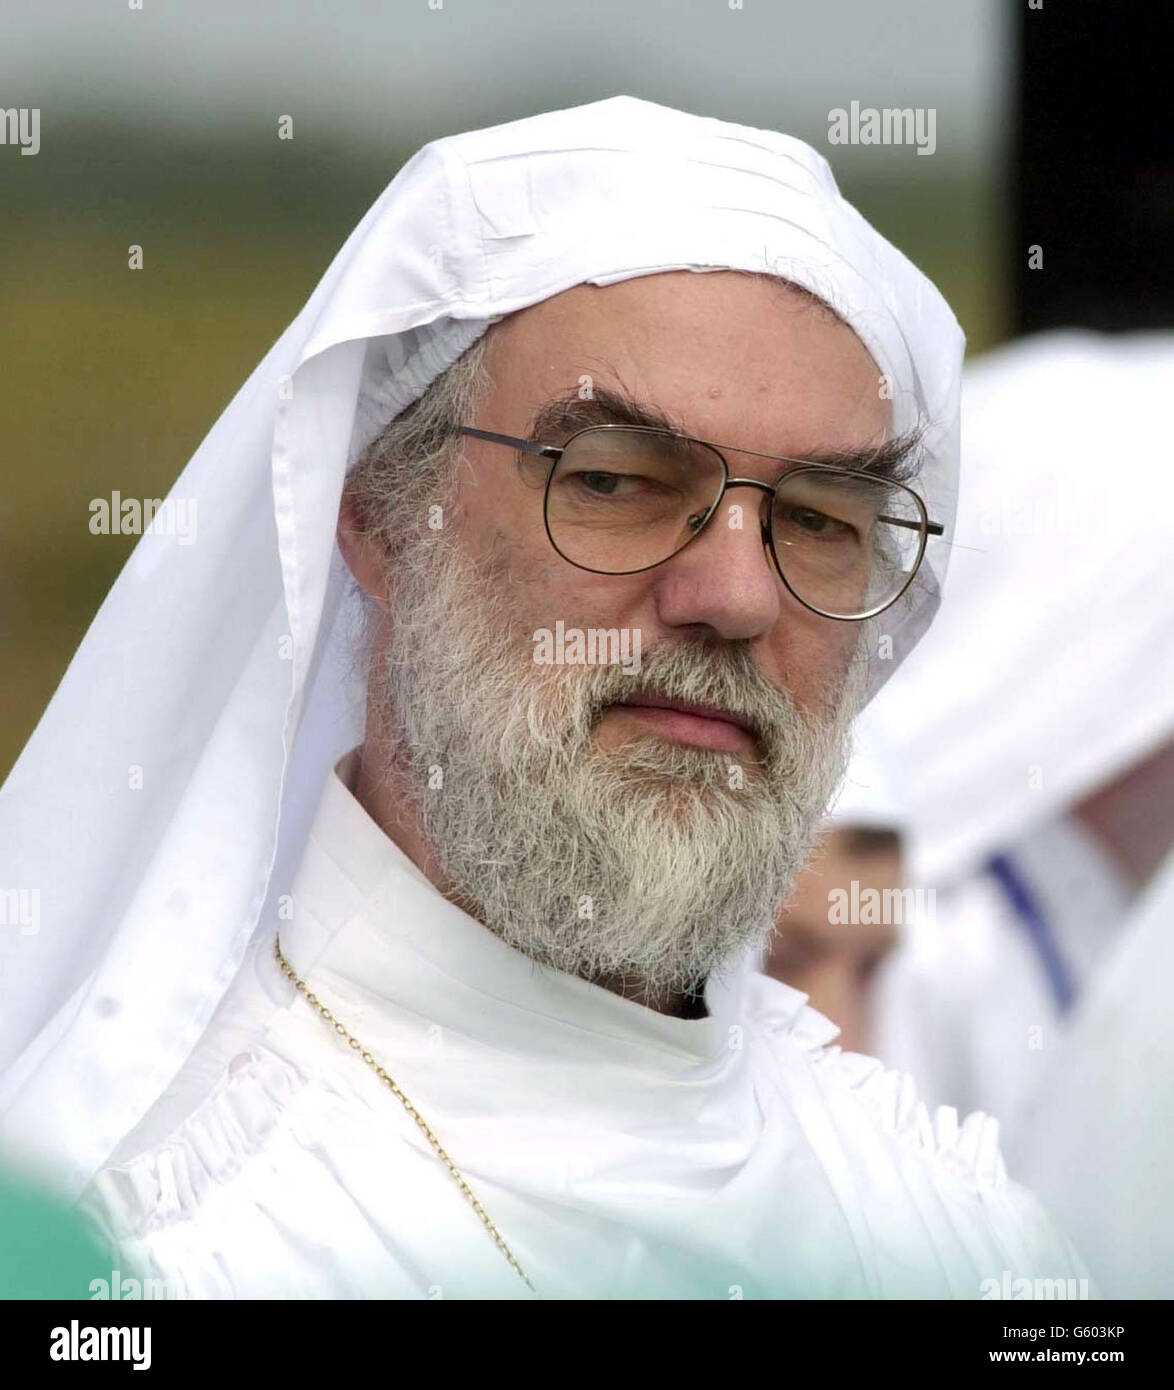 The next Archbishop of Canterbury, Dr Rowan Williams, in head gear at his induction as a Druid, during a ceremony at the Eisteddfod near St David's, Pembrokeshire, Wales. * The ceremony, which took more than an hour, started with a procession from the main Eisteddfod Pavilion to a circle of stones on the edge of the site. The actual ceremony started with a trumpet fanfare and the partial sheathing and unsheathing of a 6ft 6ins sword. Hymns and poems were said in Welsh before around 50 people were made druids. Stock Photo